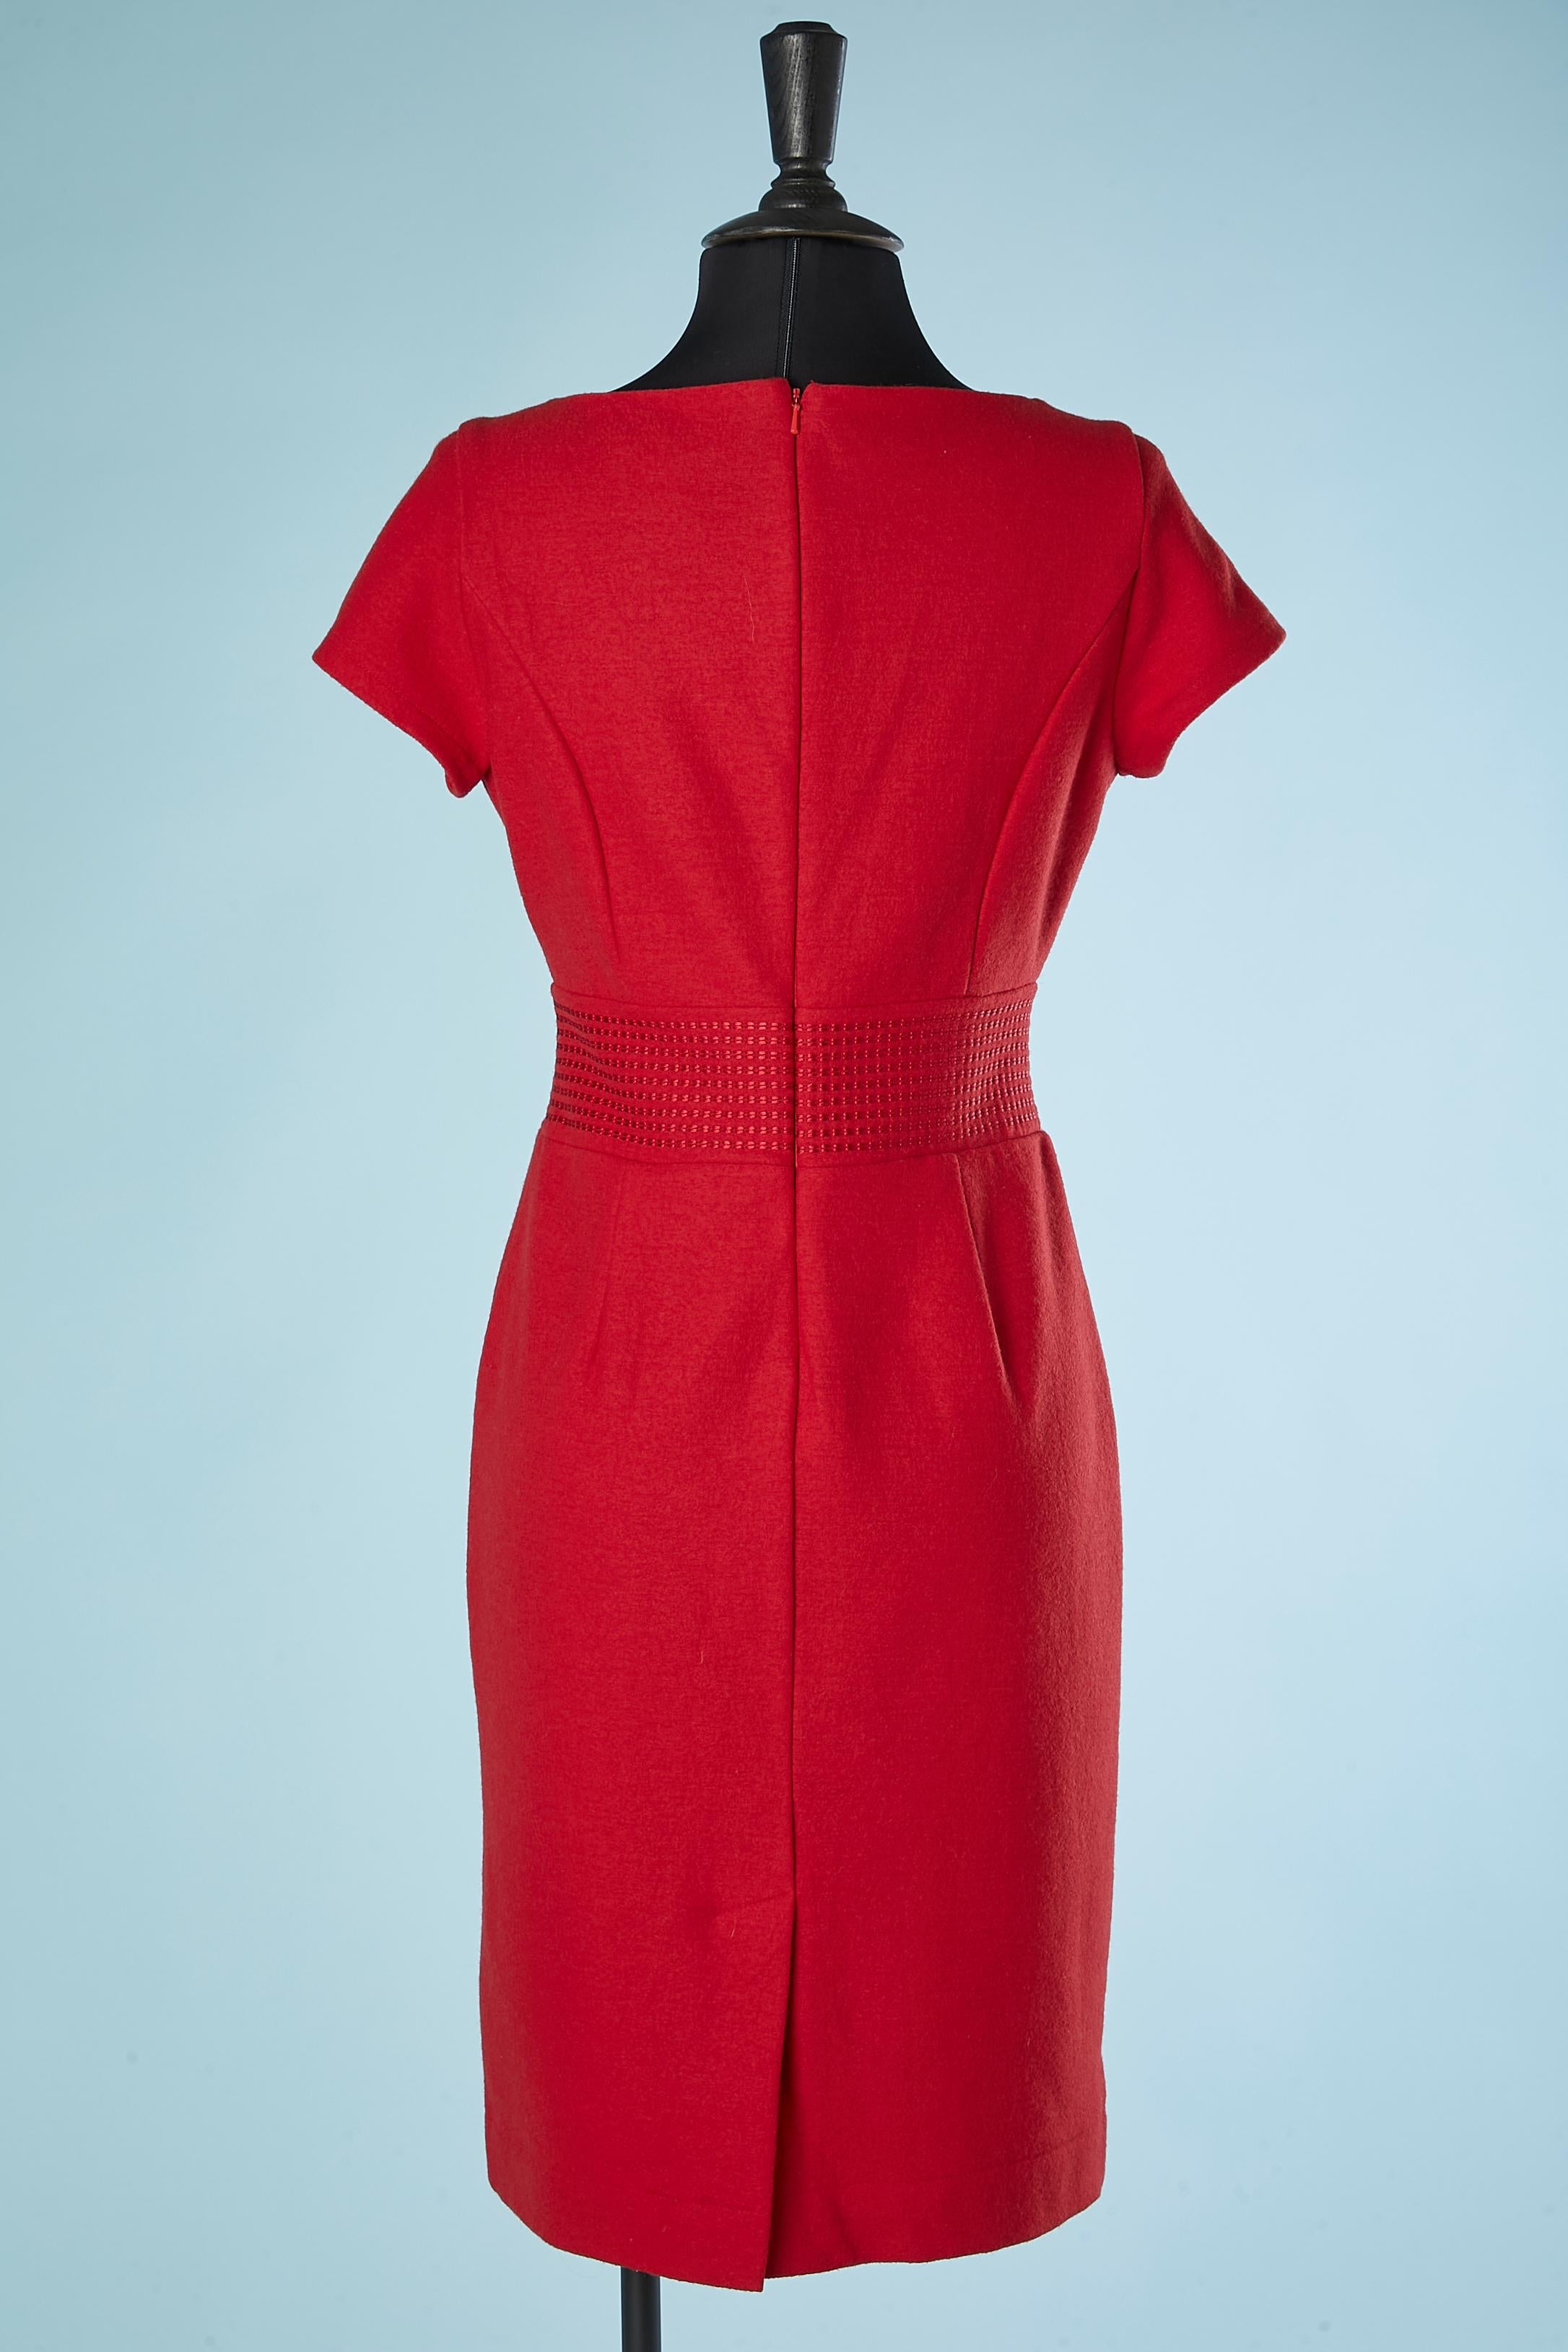 Women's Red wool short sleeve dress Christian Dior Circa 1980's  For Sale